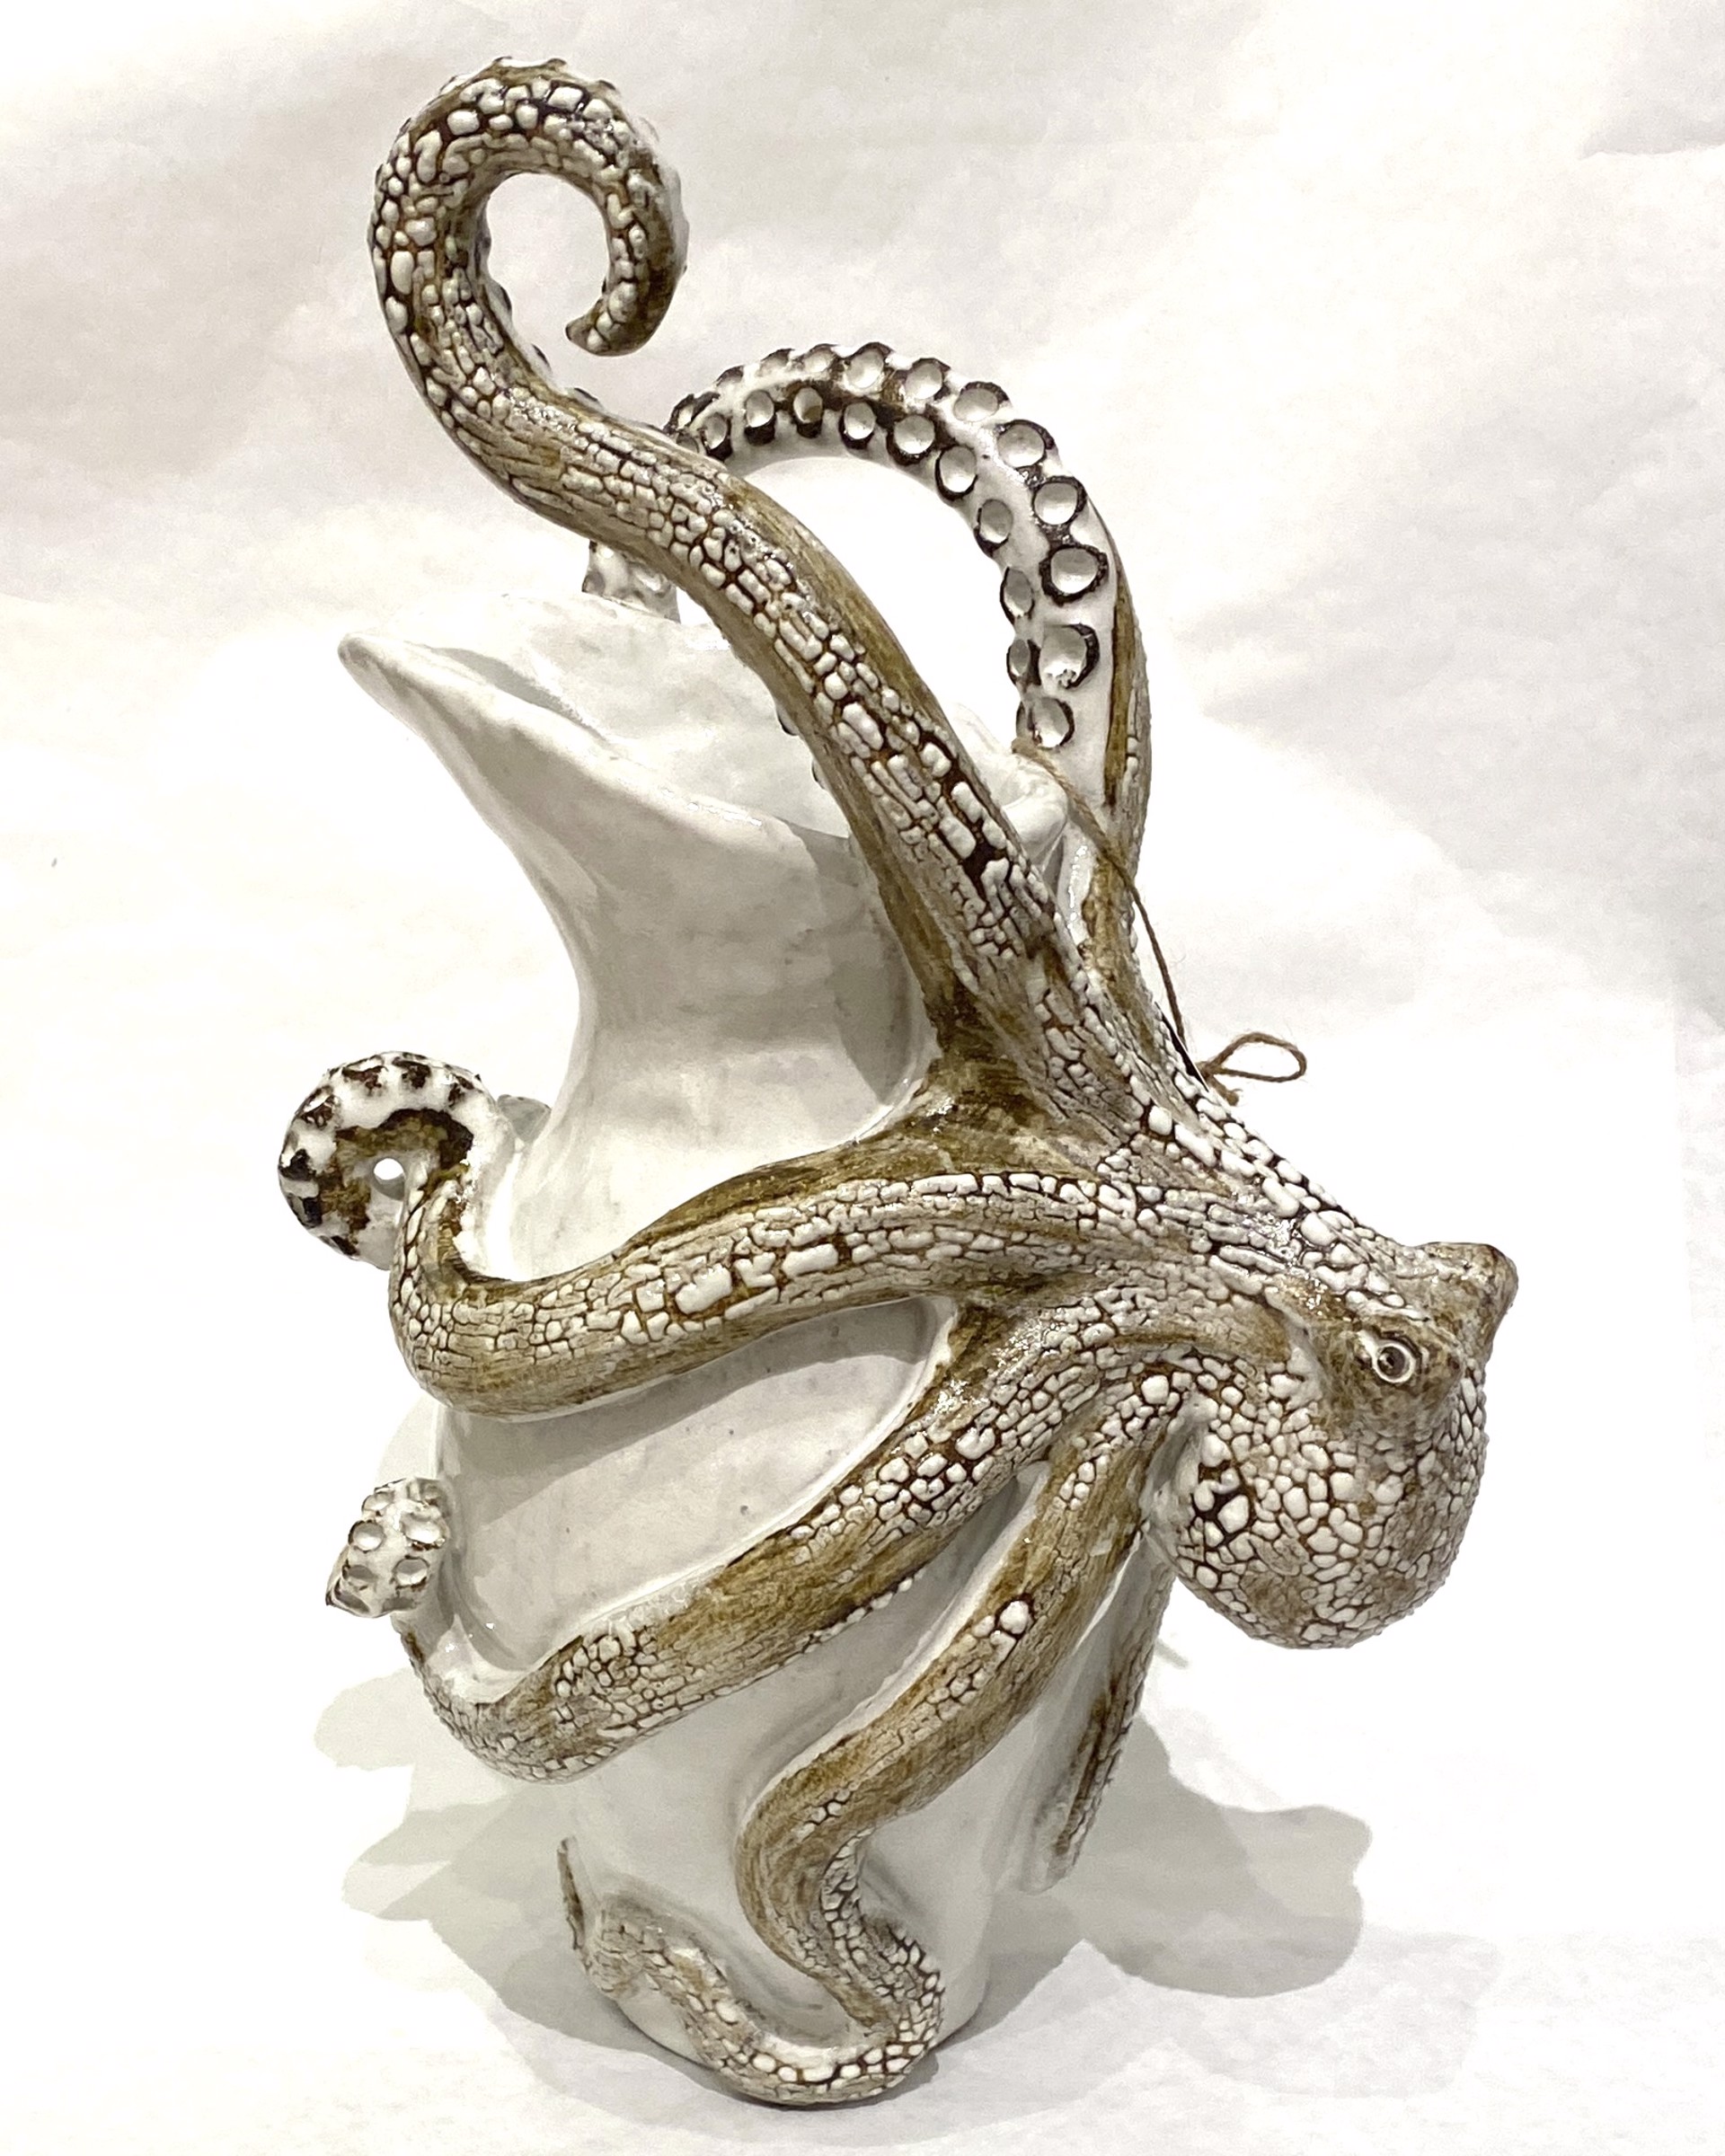 Octopus Pitcher by Shayne Greco